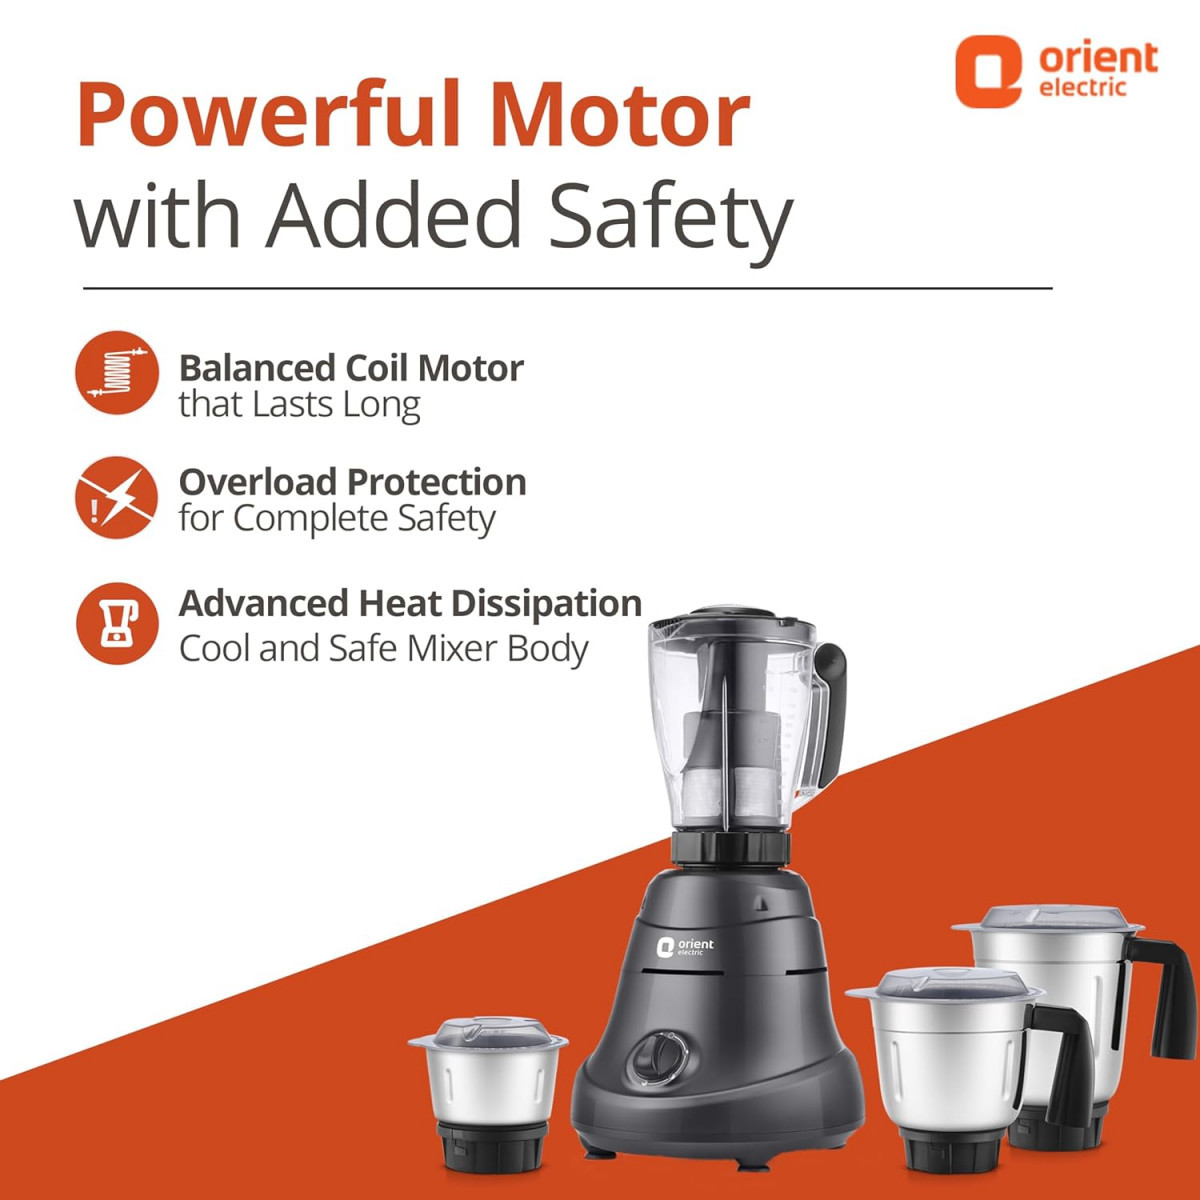 Orient Electric 750W Mixer Grinder with Juicer  Super Power 750 MGSP75B4 4 jar with 3 SS Jars and 1 PC juicing jar with Seive  Longer Life Balanced Coil Motor 5 Years Motor Warranty